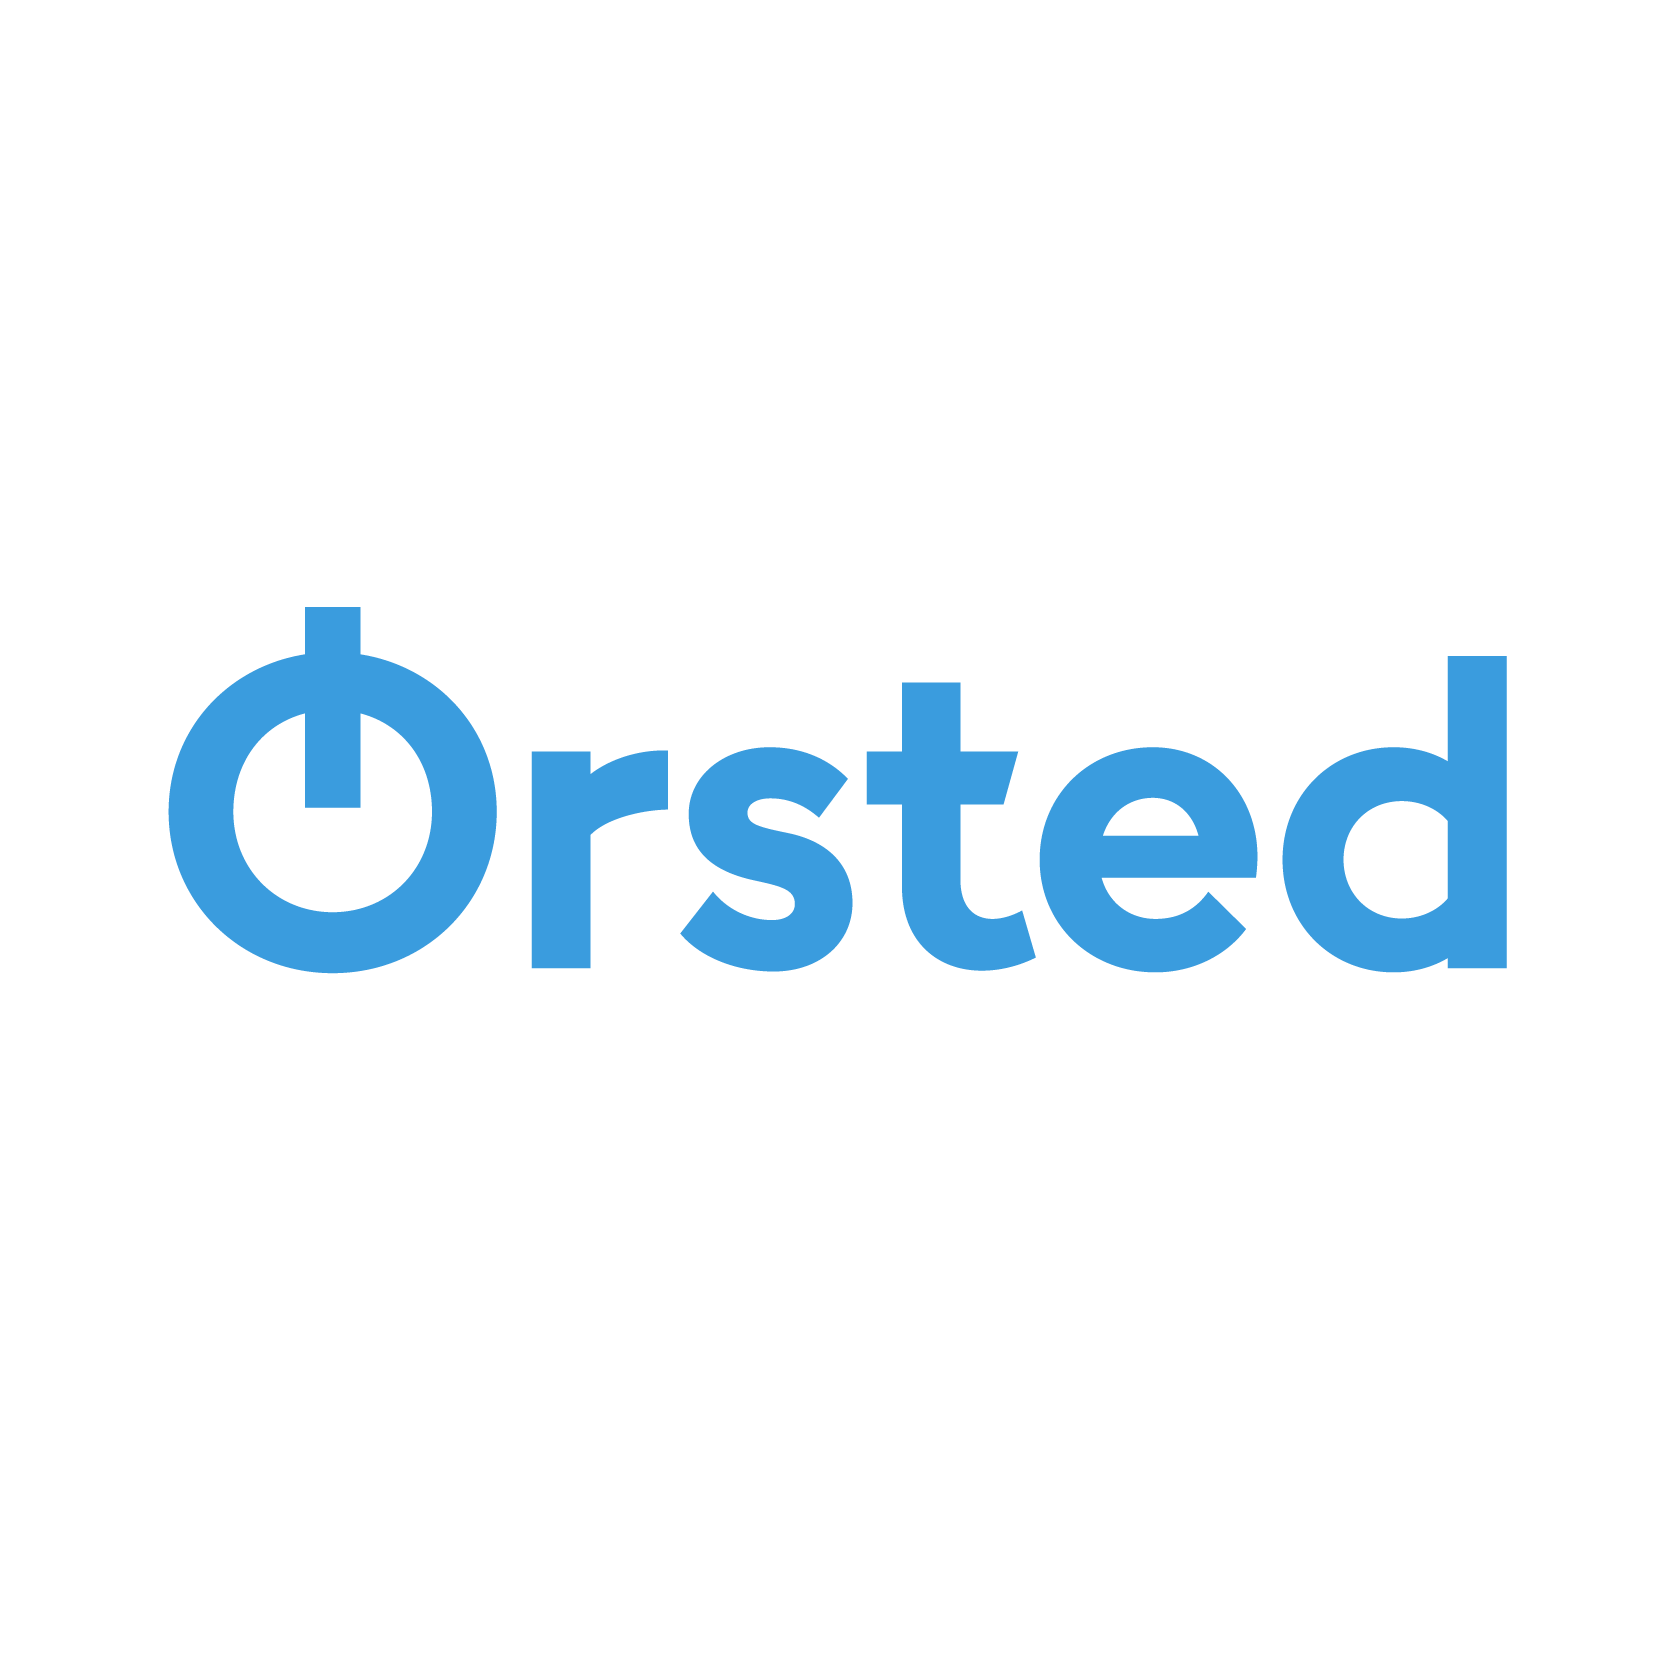 Orsted logo in blue